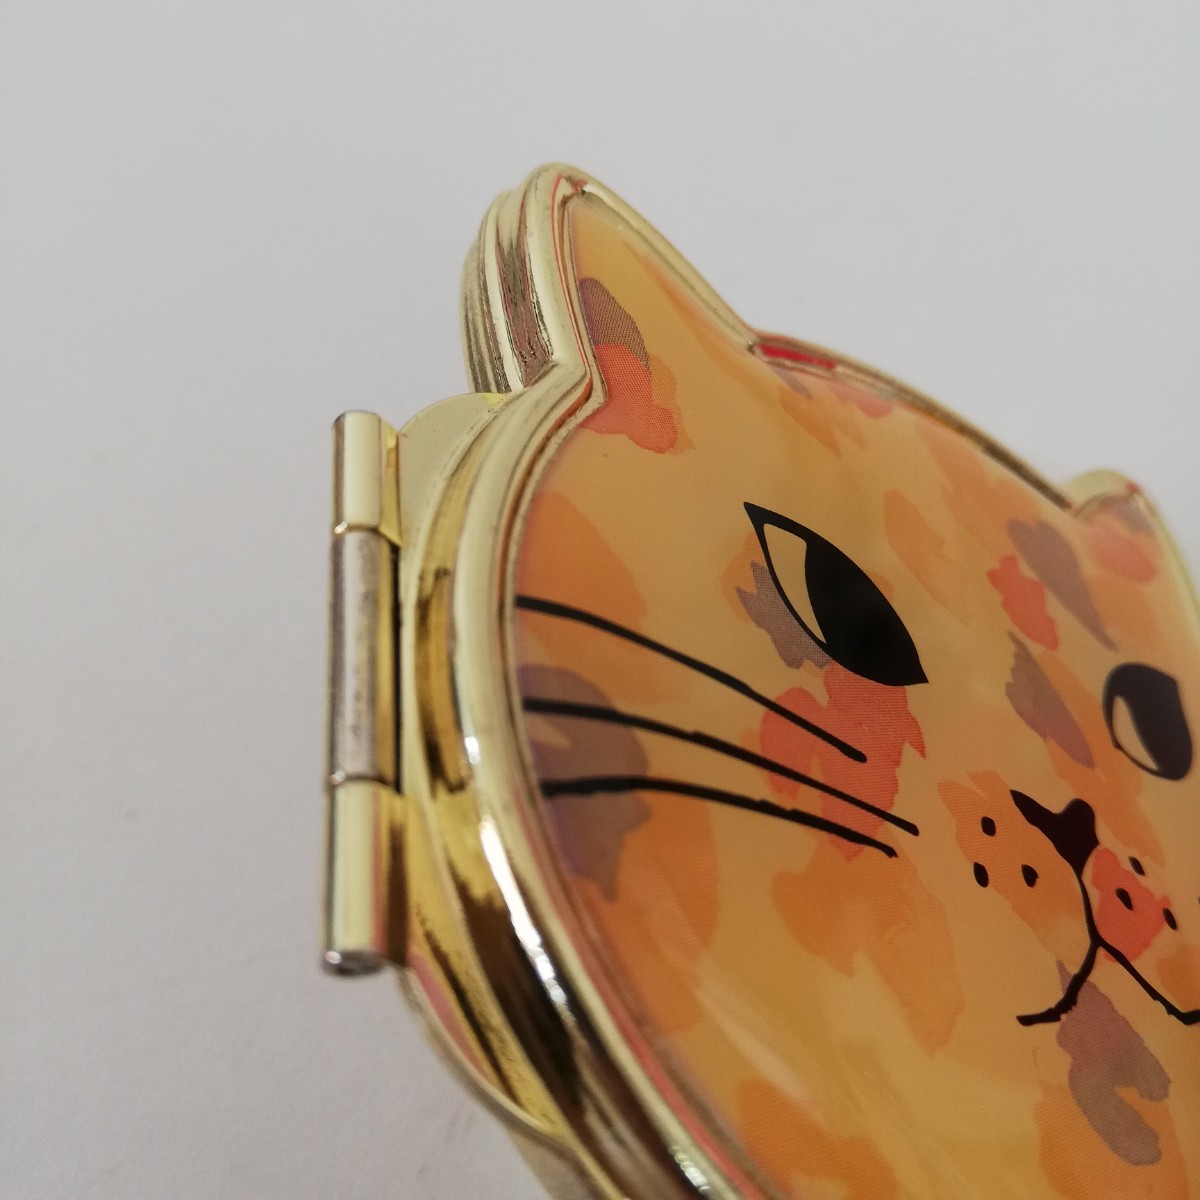 FLOWERING flower ring compact mirror cat type both sides mirror hand-mirror 8cm [ cat .. goods ]